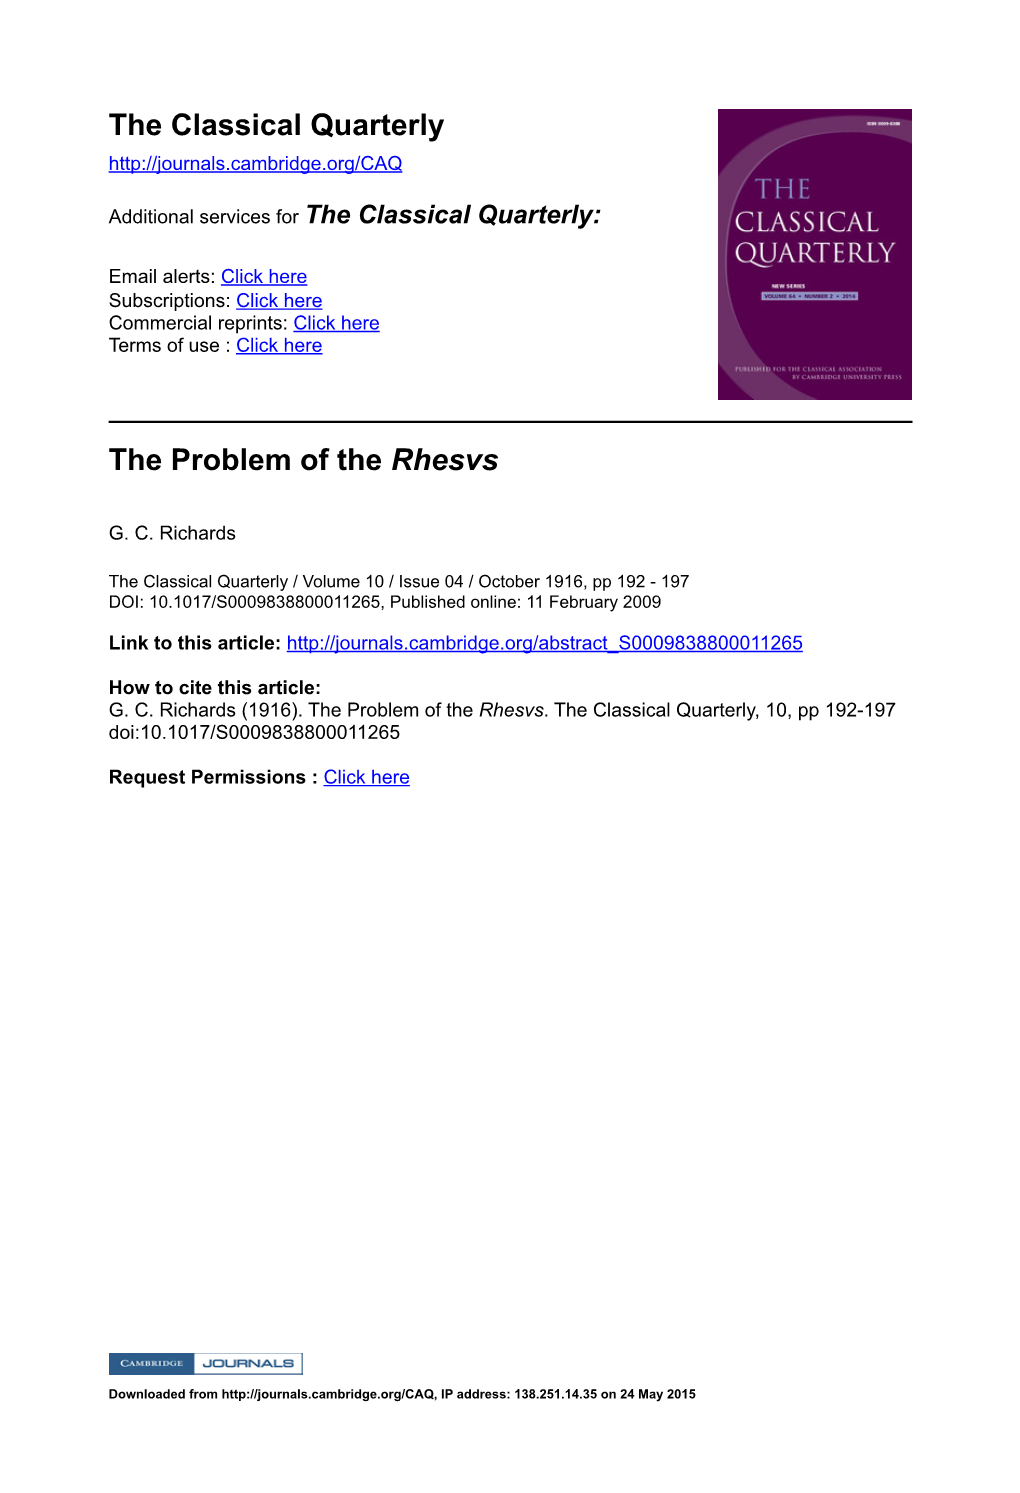 The Problem of the Rhesvs